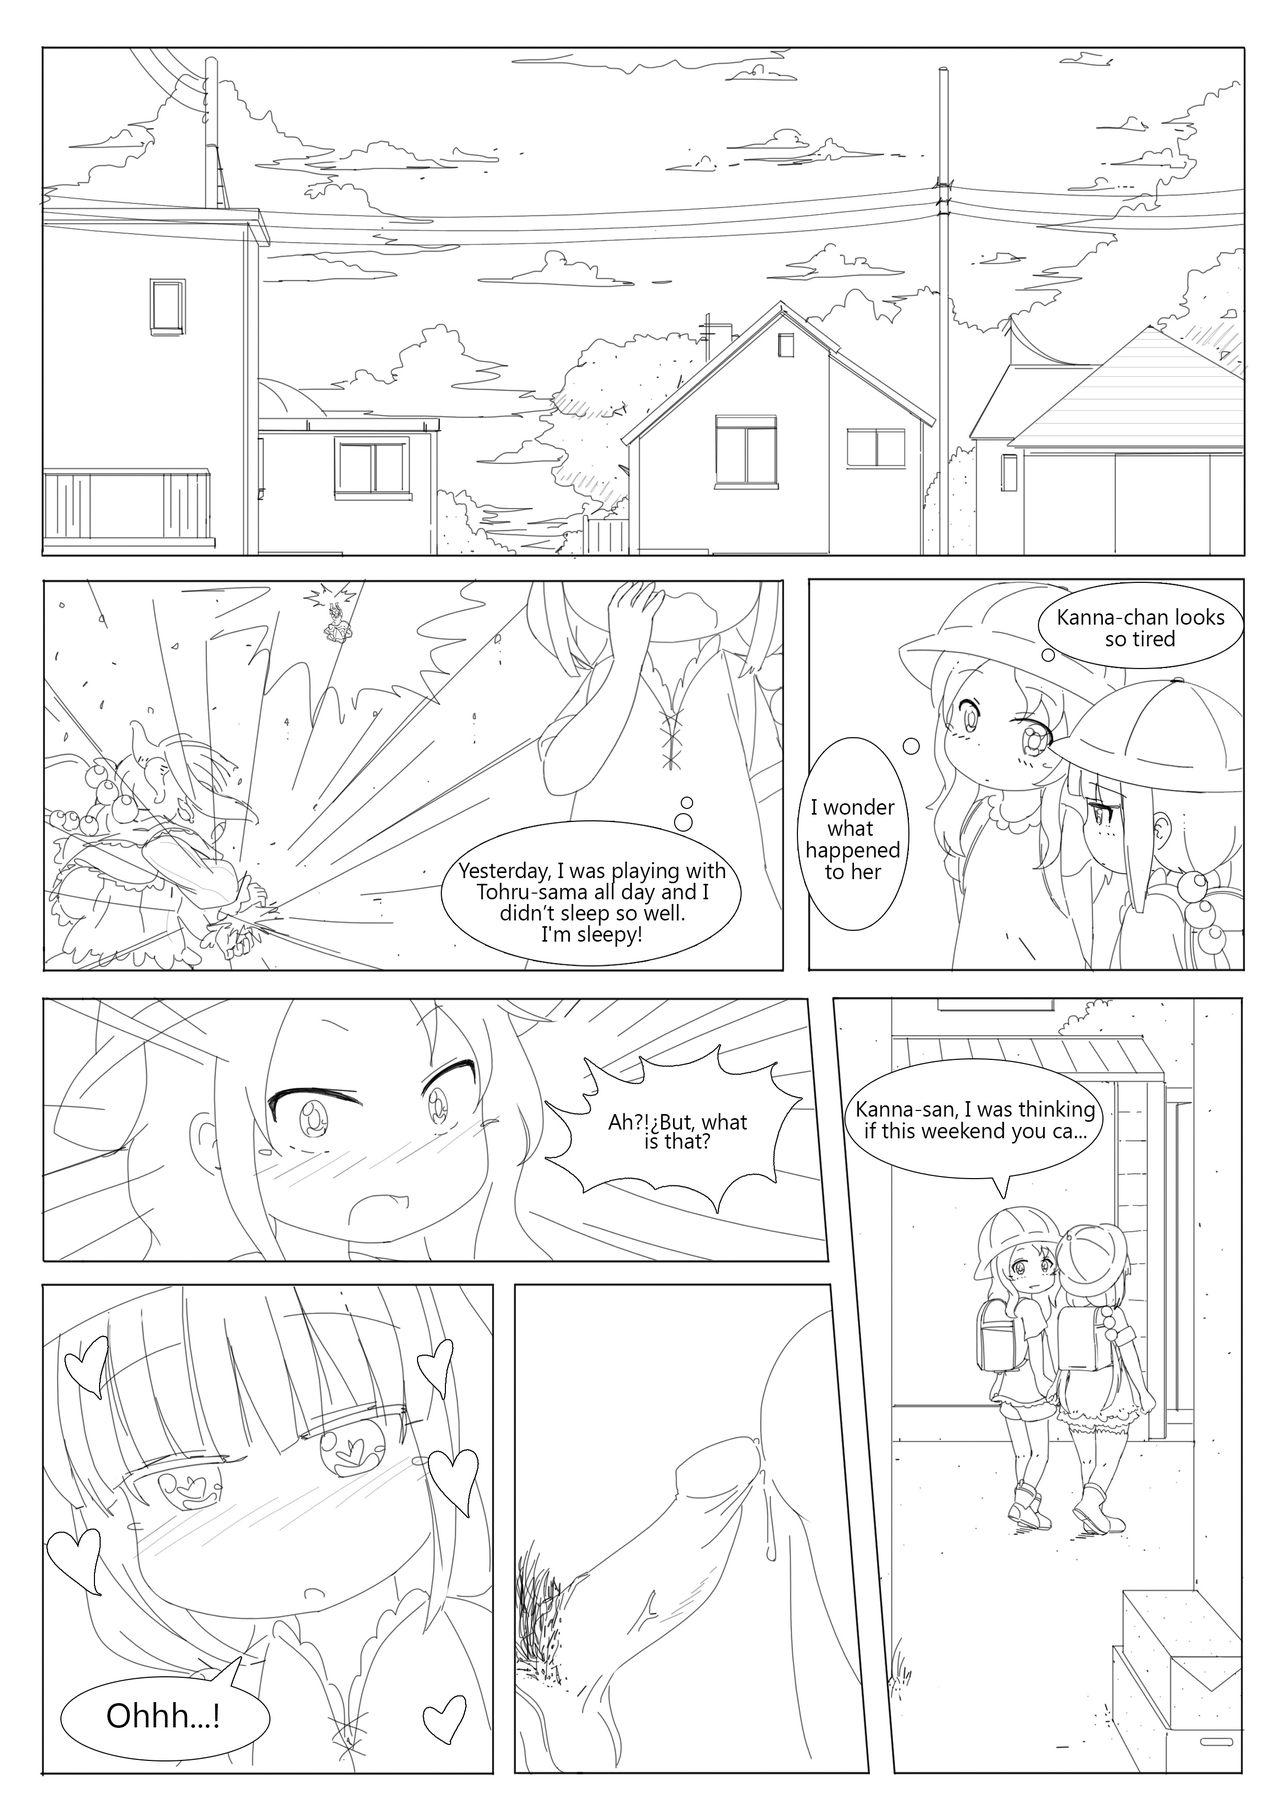 ComicTED Vol 2 [Radioactive Cockroach] Ted The Ero Dinasty (The Cum Hungry Dragon Loli) 0